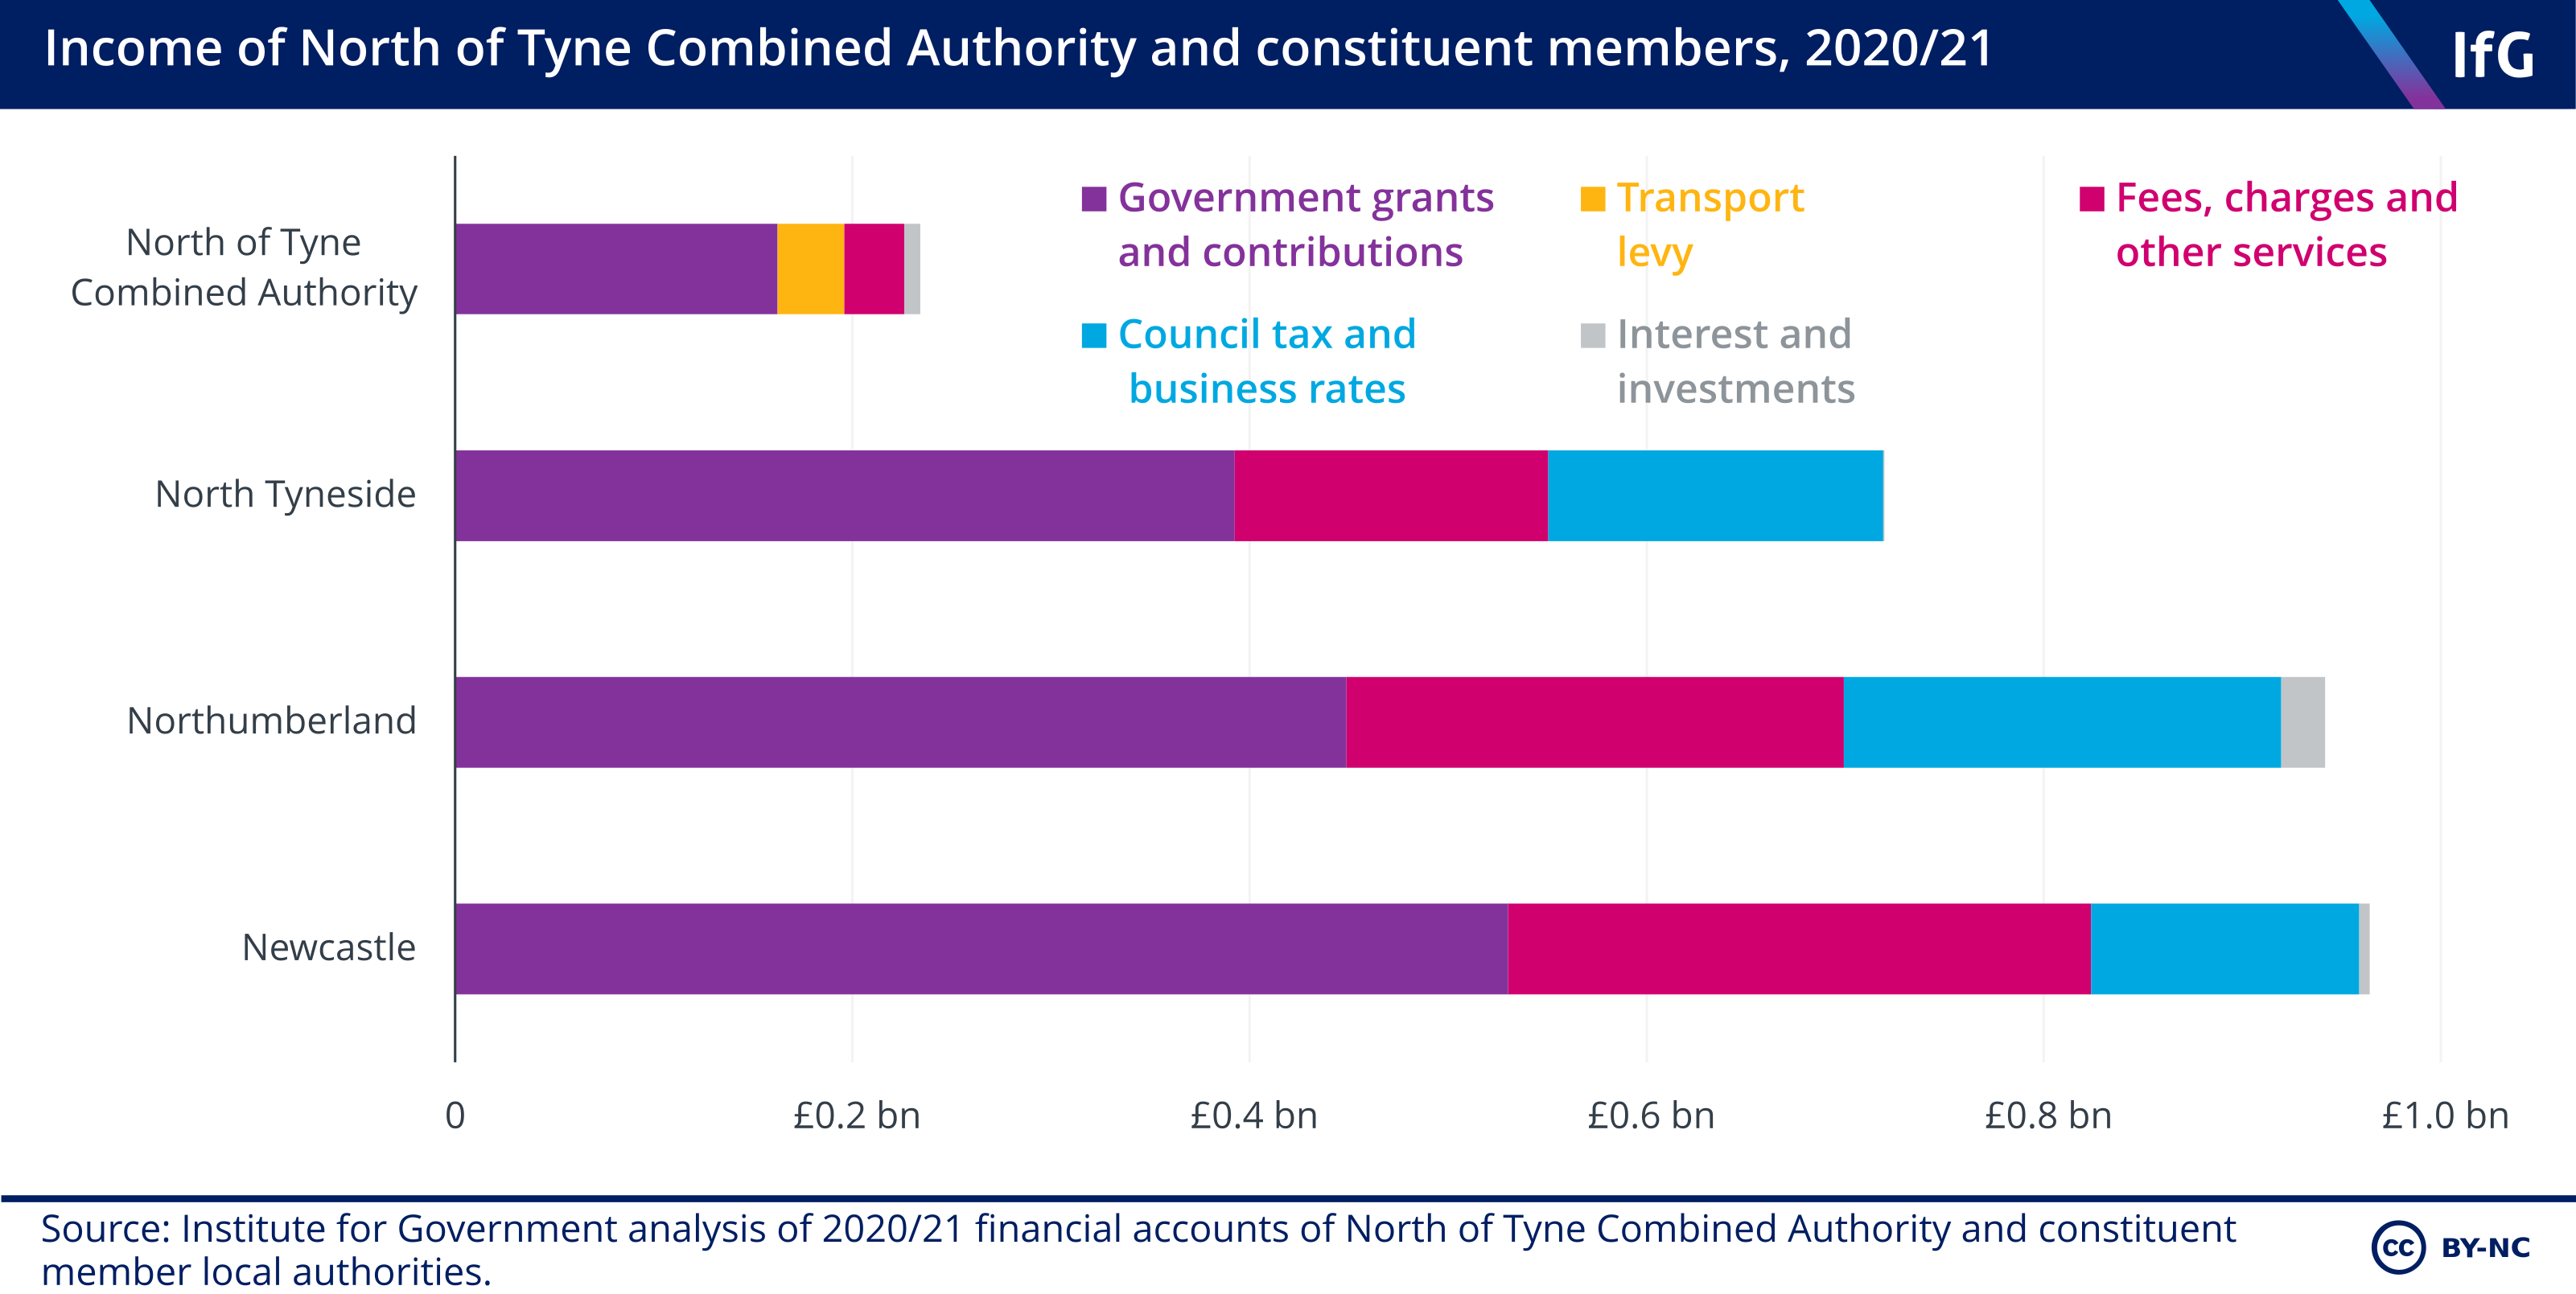 Income of North of Tyne Combined Authority and constituent members, 2020/21